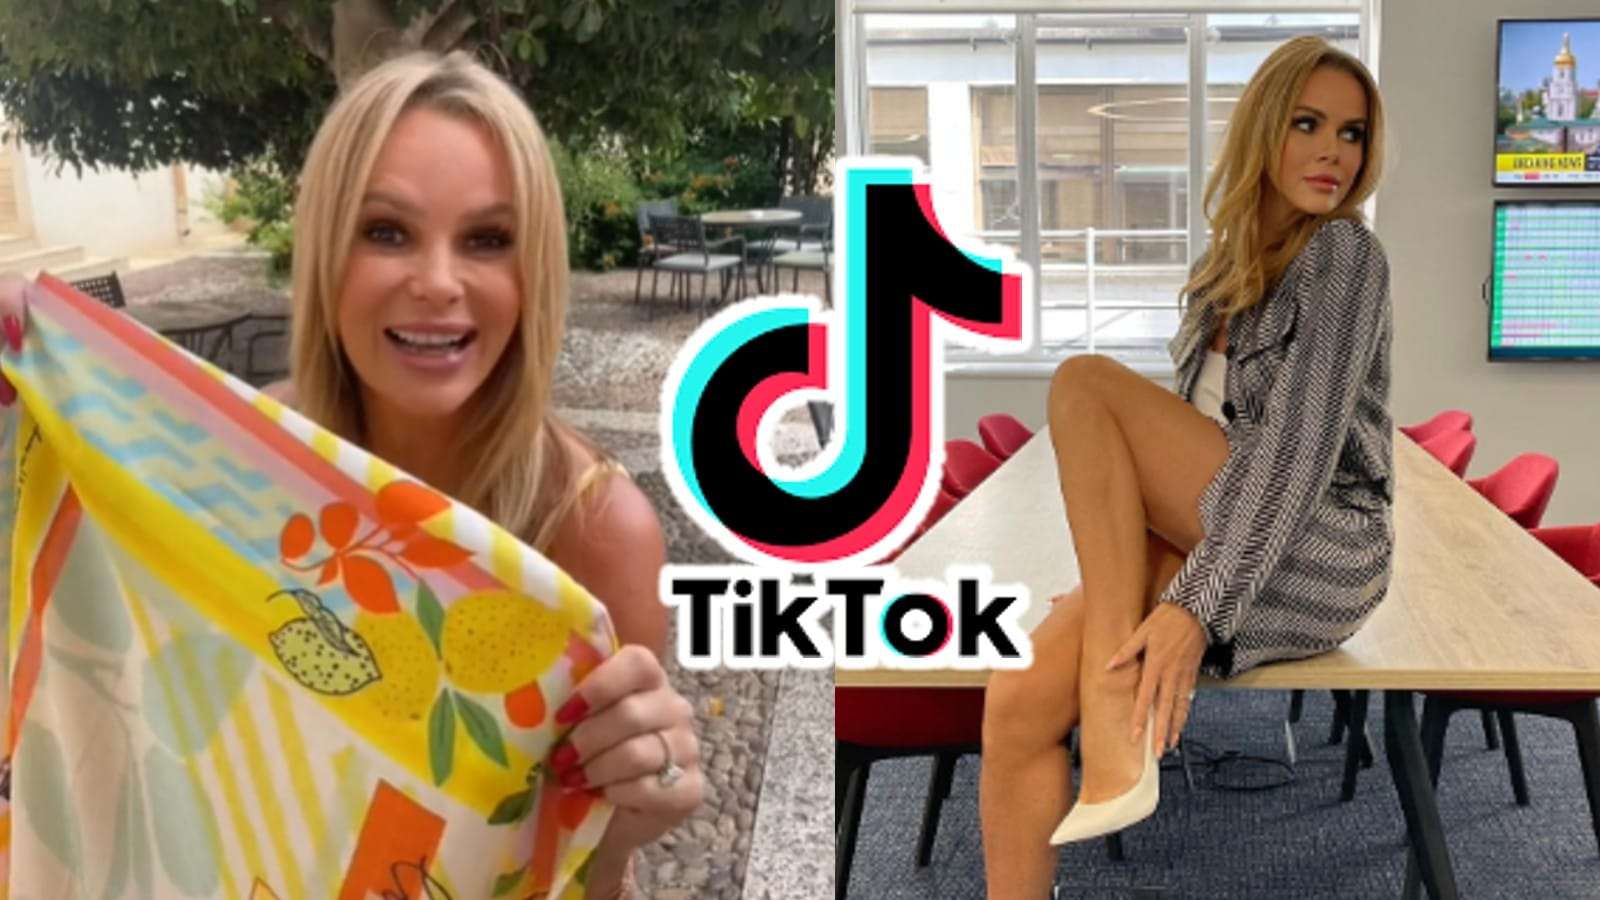 Amanda Holden's "terrifying" TikTok video over a scarf with Instagram picture